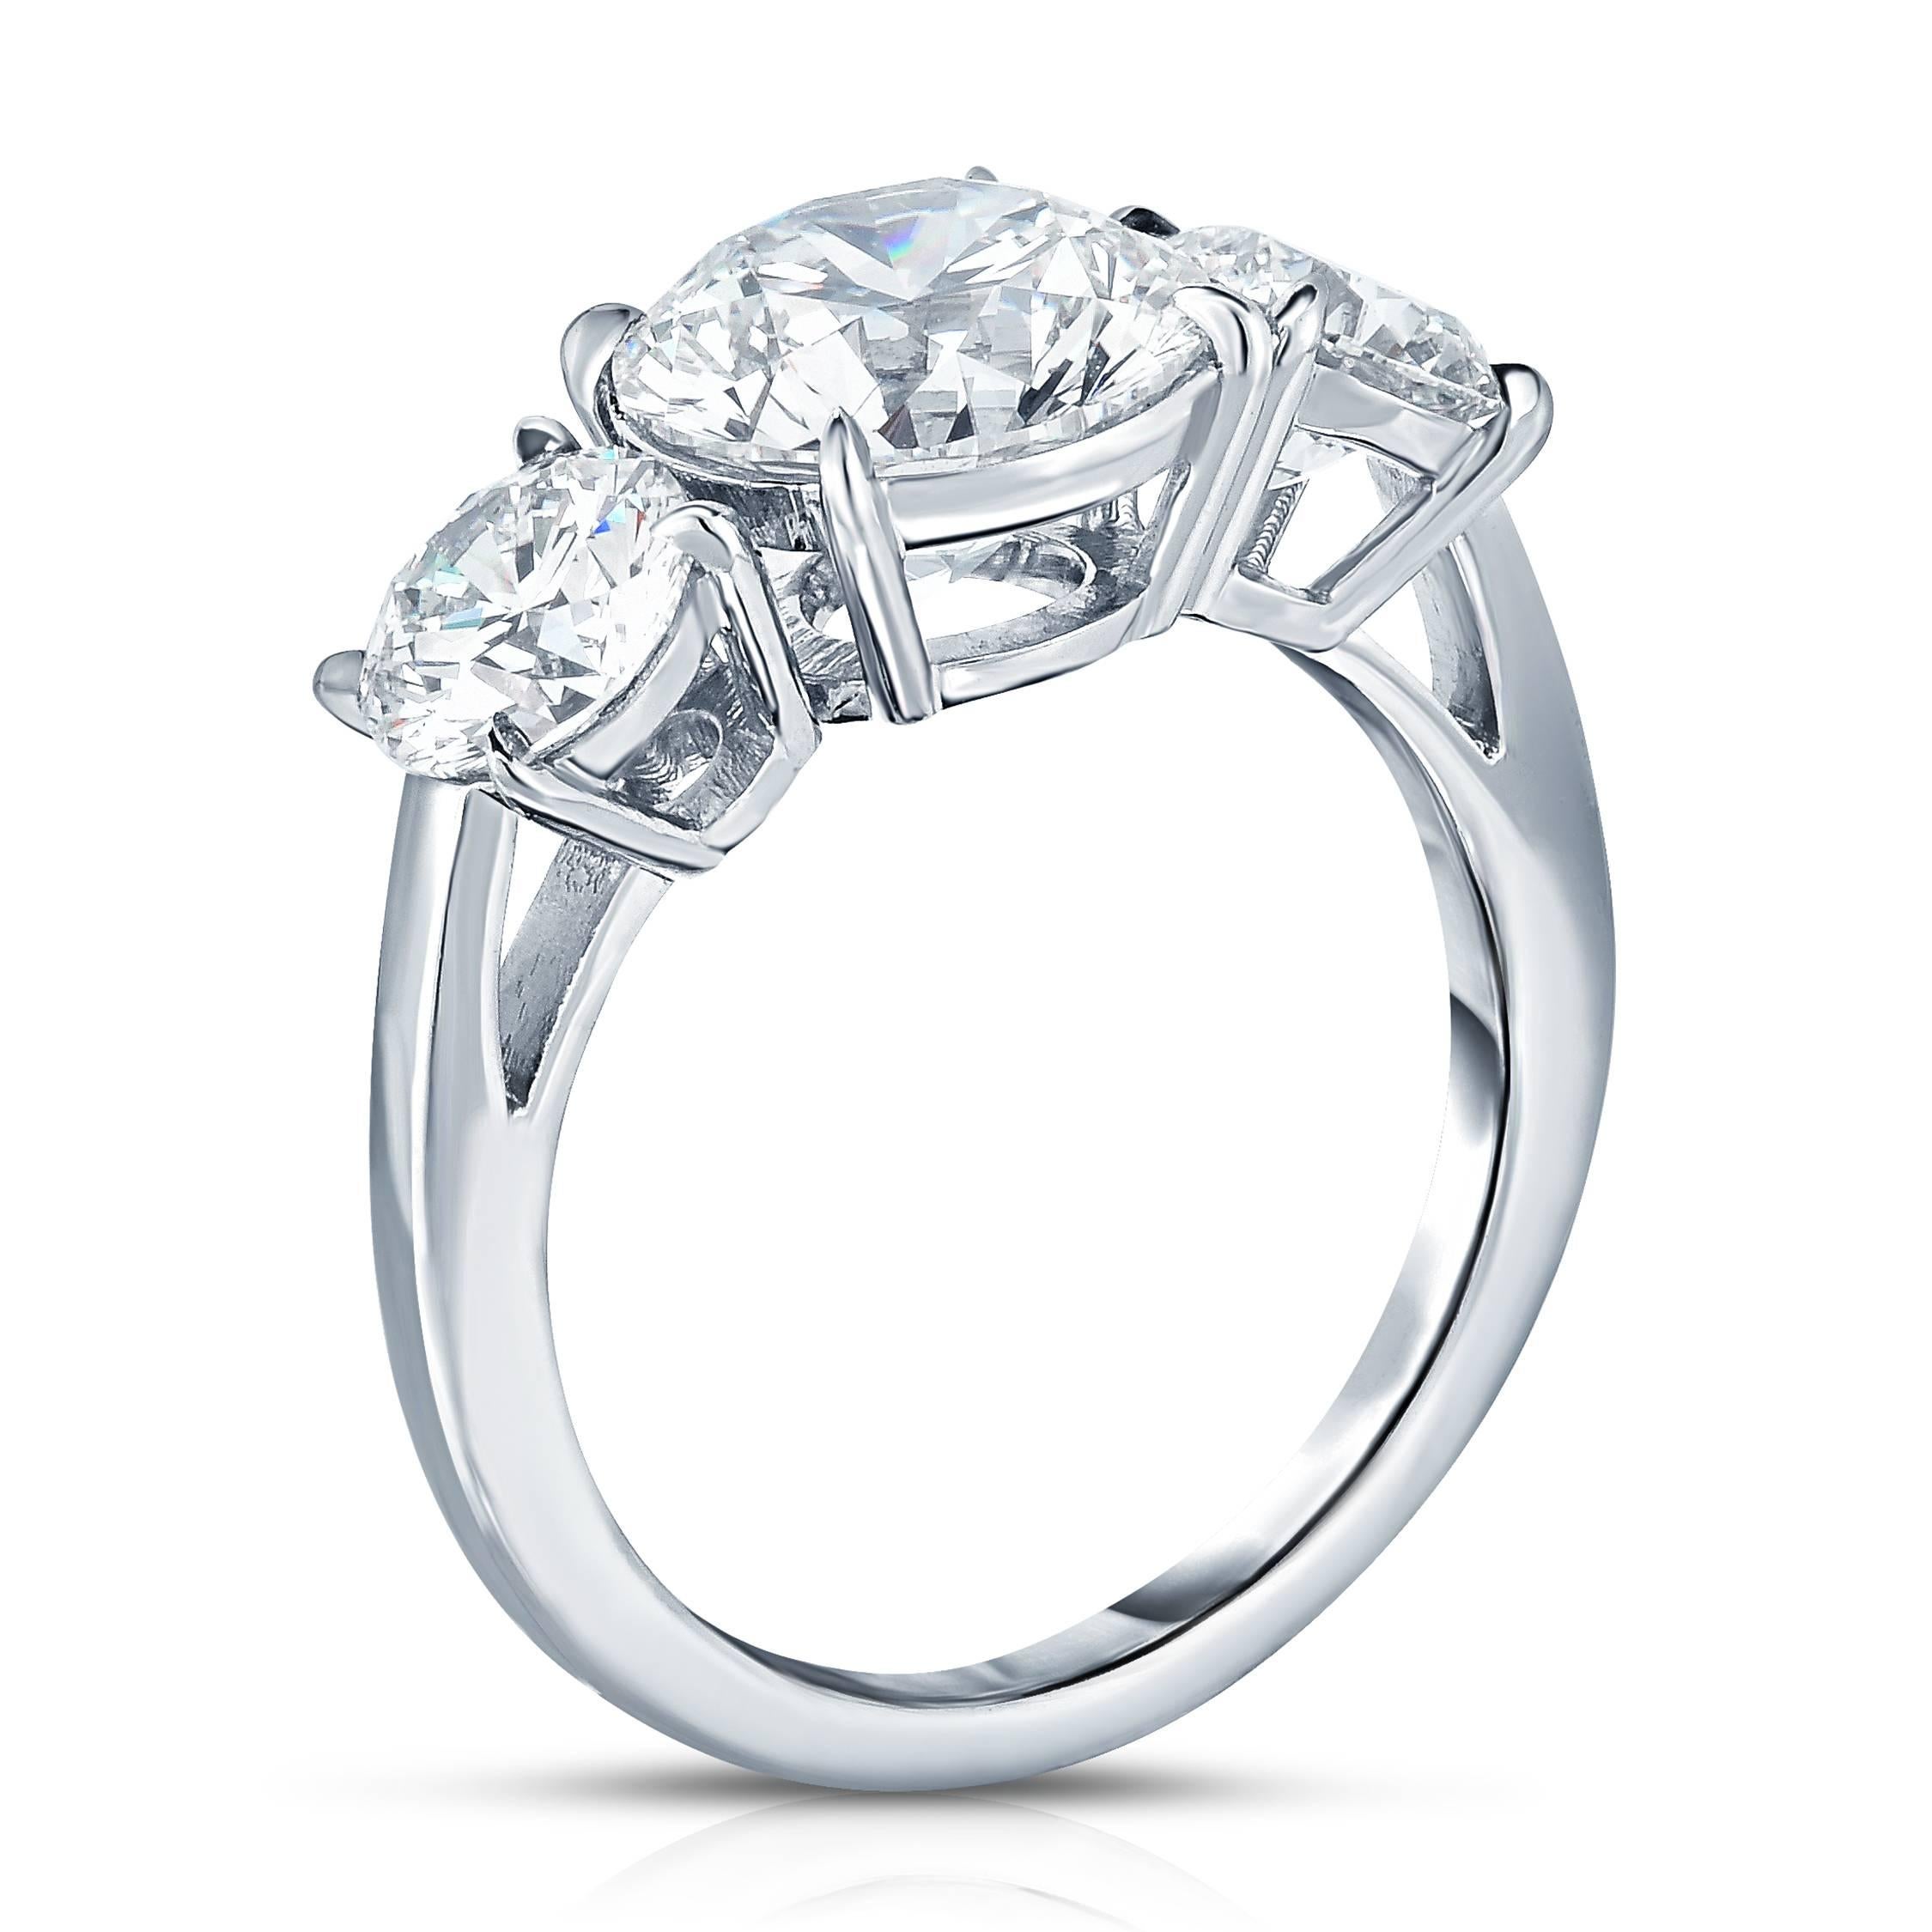  2.57 carat Round Brilliant Diamonds with two 0.70 carat Forevermark Round Diamonds in platinum. Designed as a three stone engagement ring.  

 This elegant engagement ring was beautifully sculpted in platinum by as master jeweler who crafted the